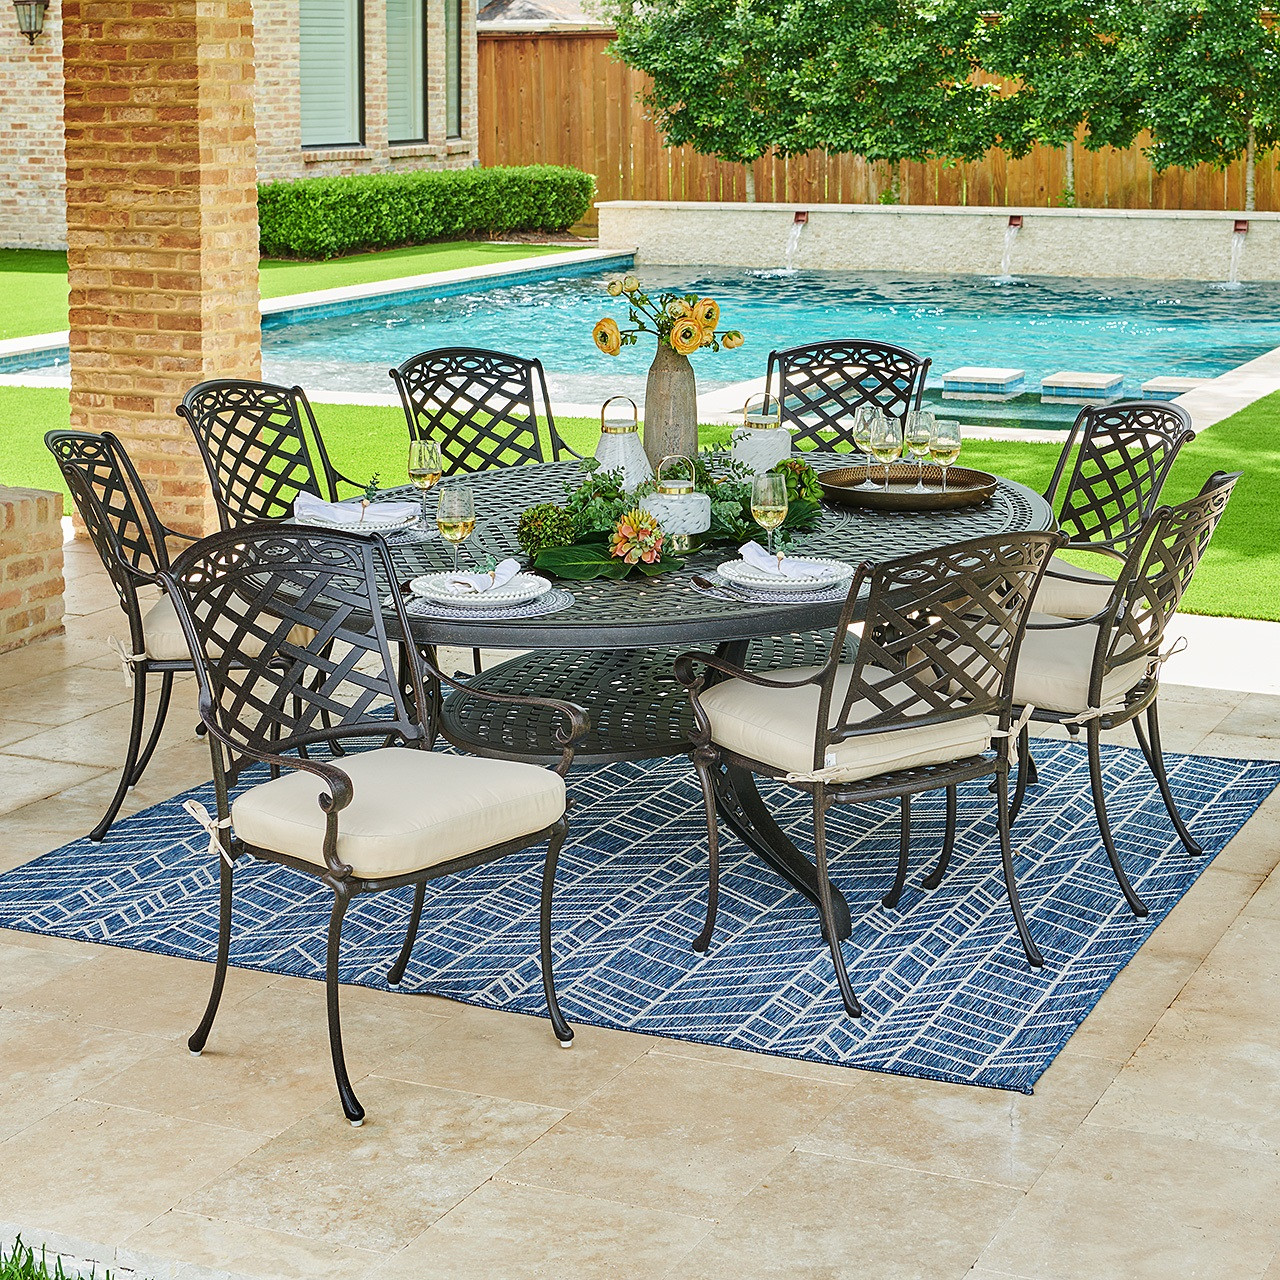 San Remo Aged Bronze Cast Aluminum with Cushions 9 Pc. Dining Set + 98 x 69  in. Table - Fortunoff Backyard Store